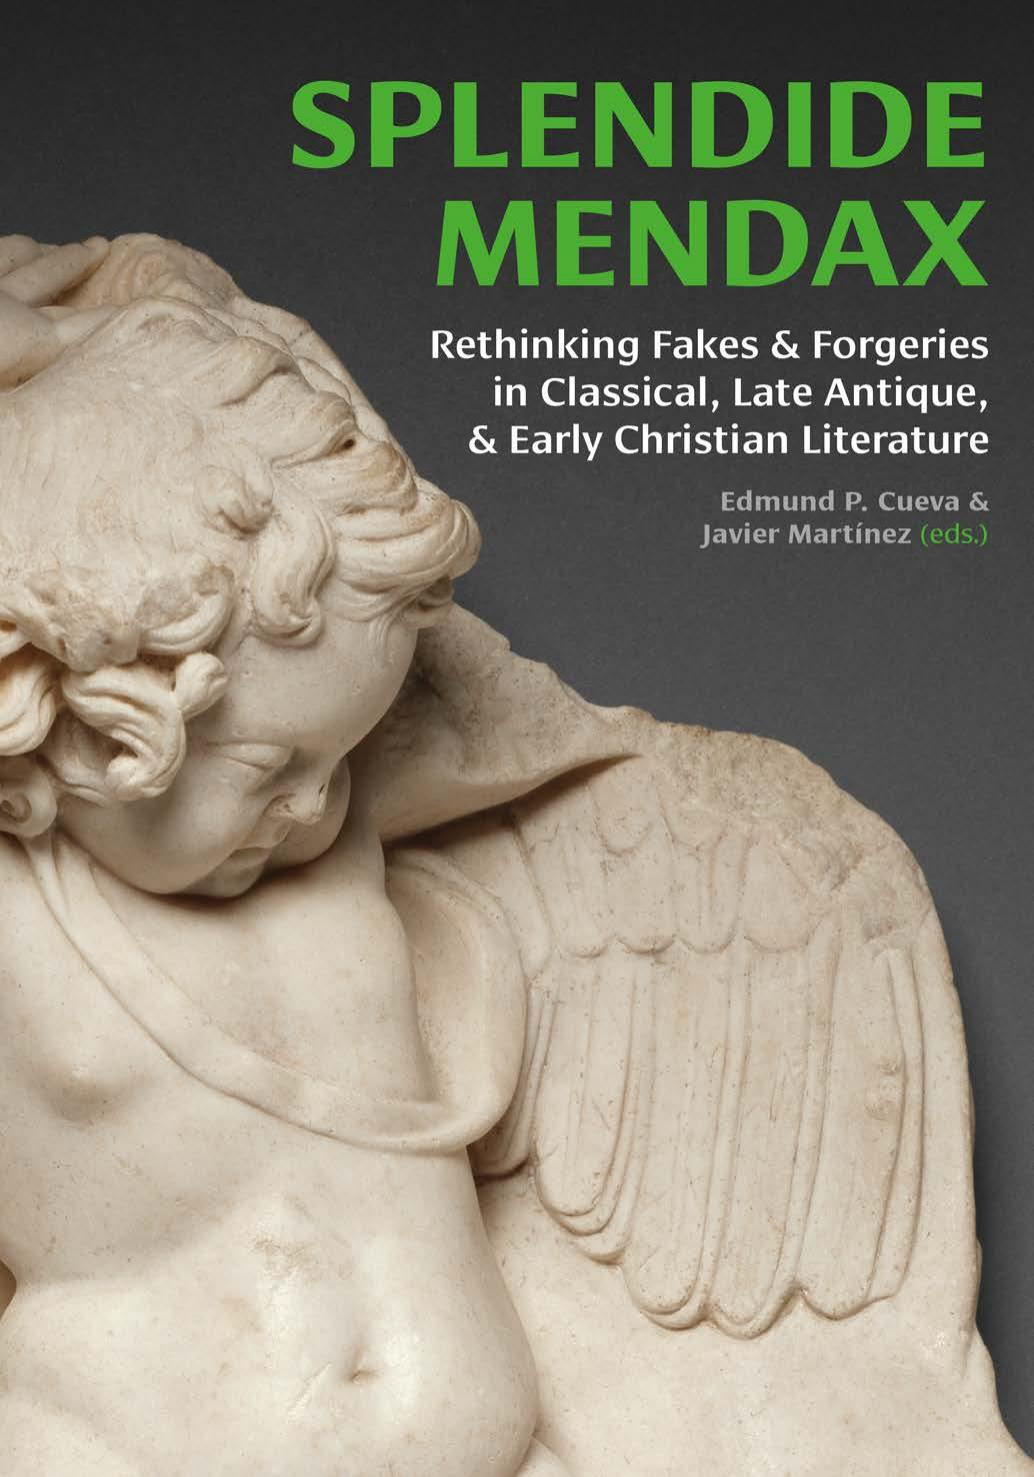 Splendide Mendax : Rethinking Fakes and Forgeries in Classical, Late Antique, and Early Christian Literature by Edmund P. Cueva; Javier Martínez